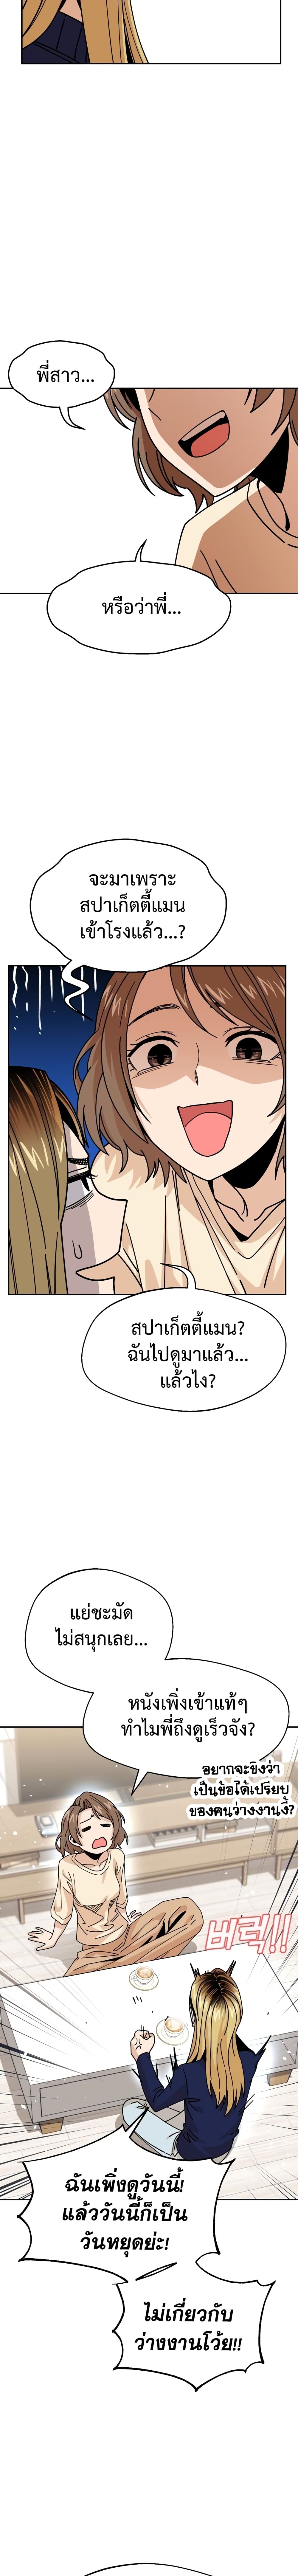 Match Made in Heaven by chance ตอนที่ 14 (15)